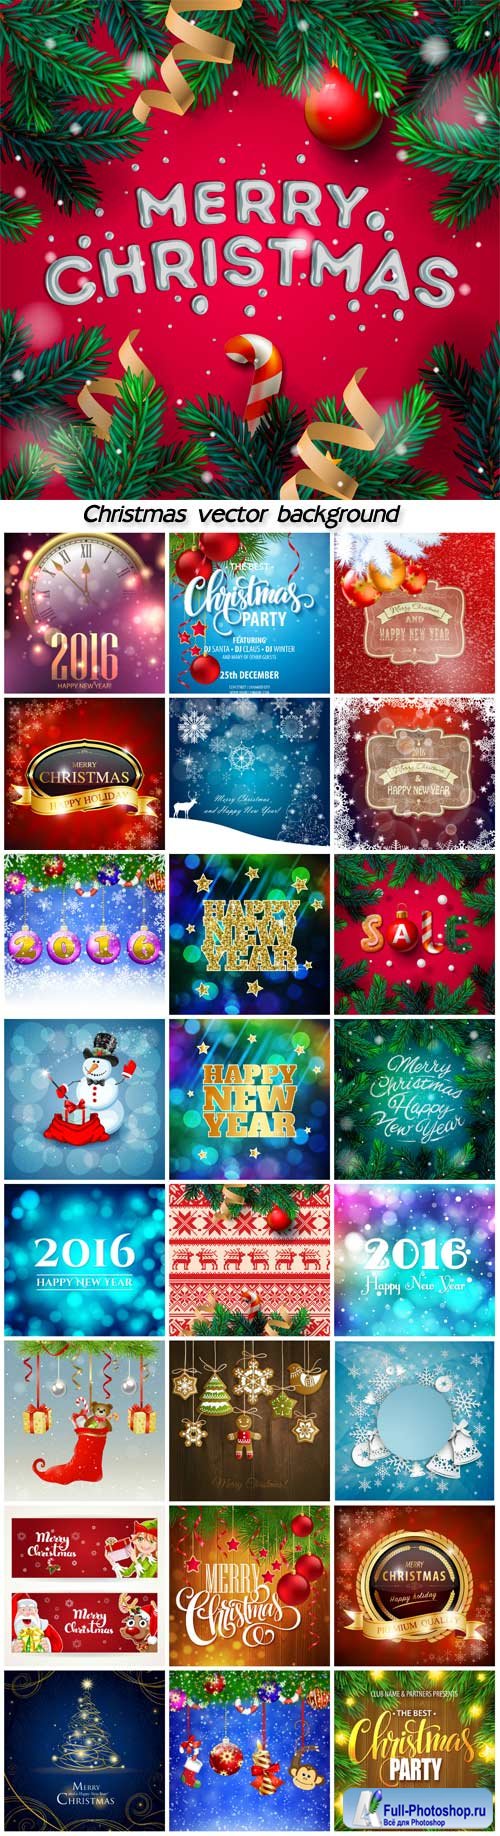 Christmas decoration on vector background